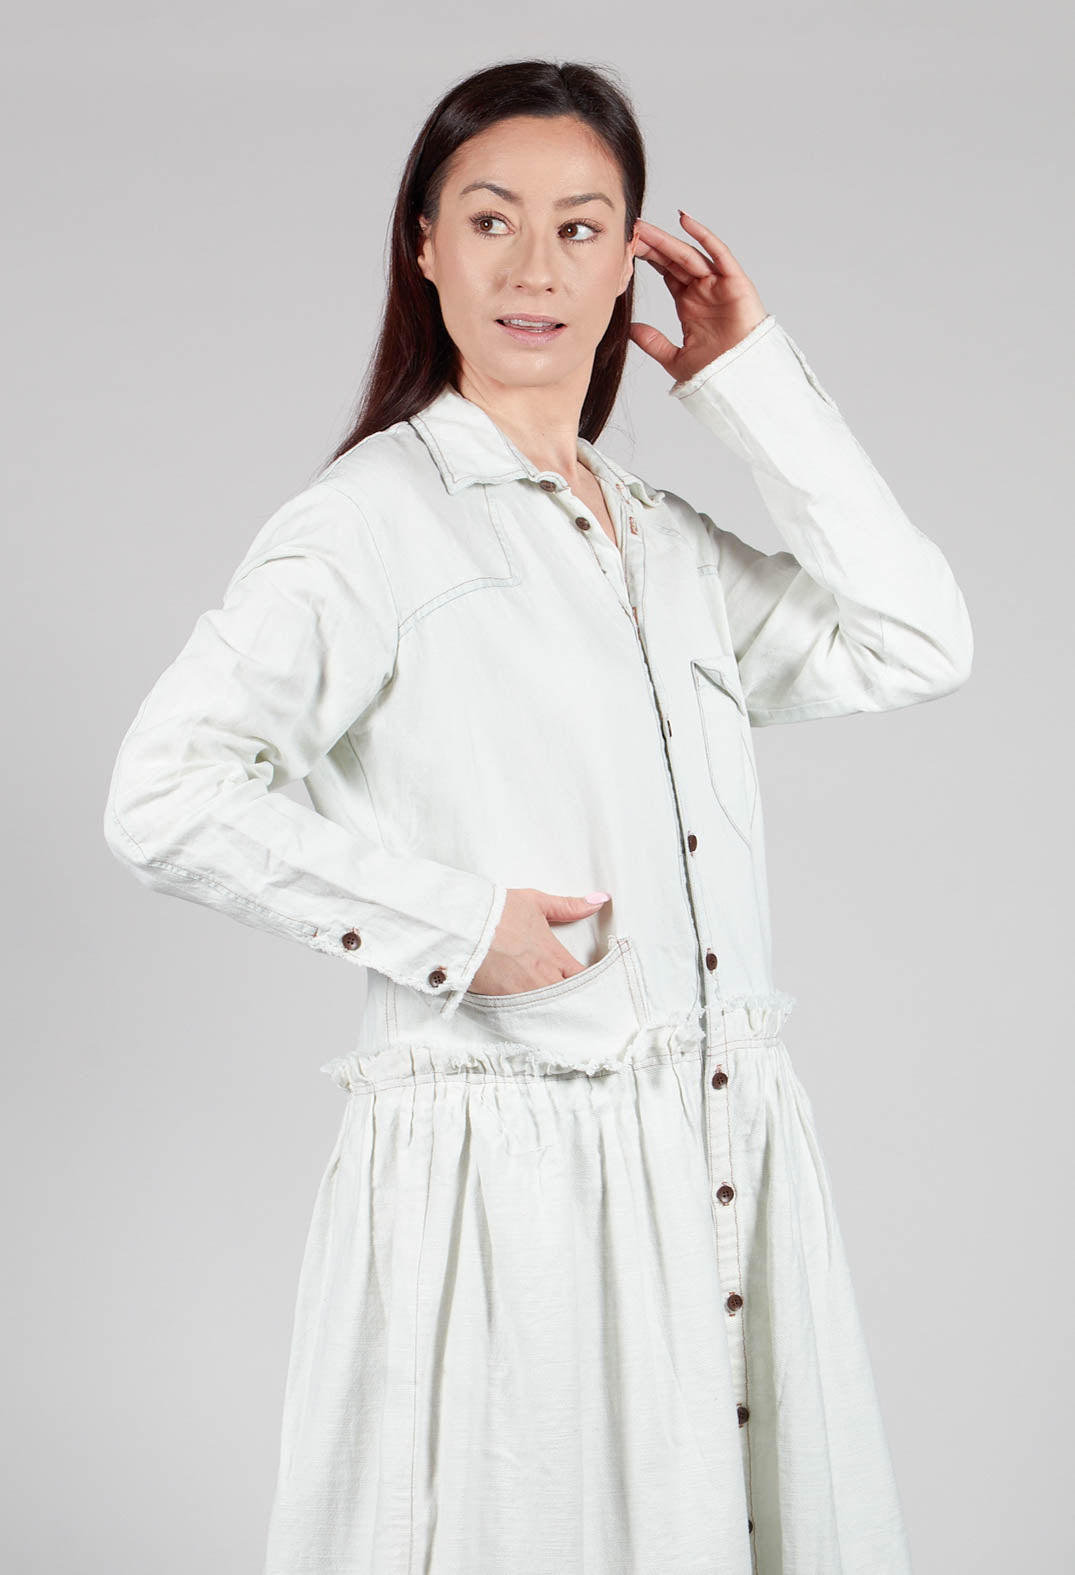 Longline Shirt Dress in Off White and Blue